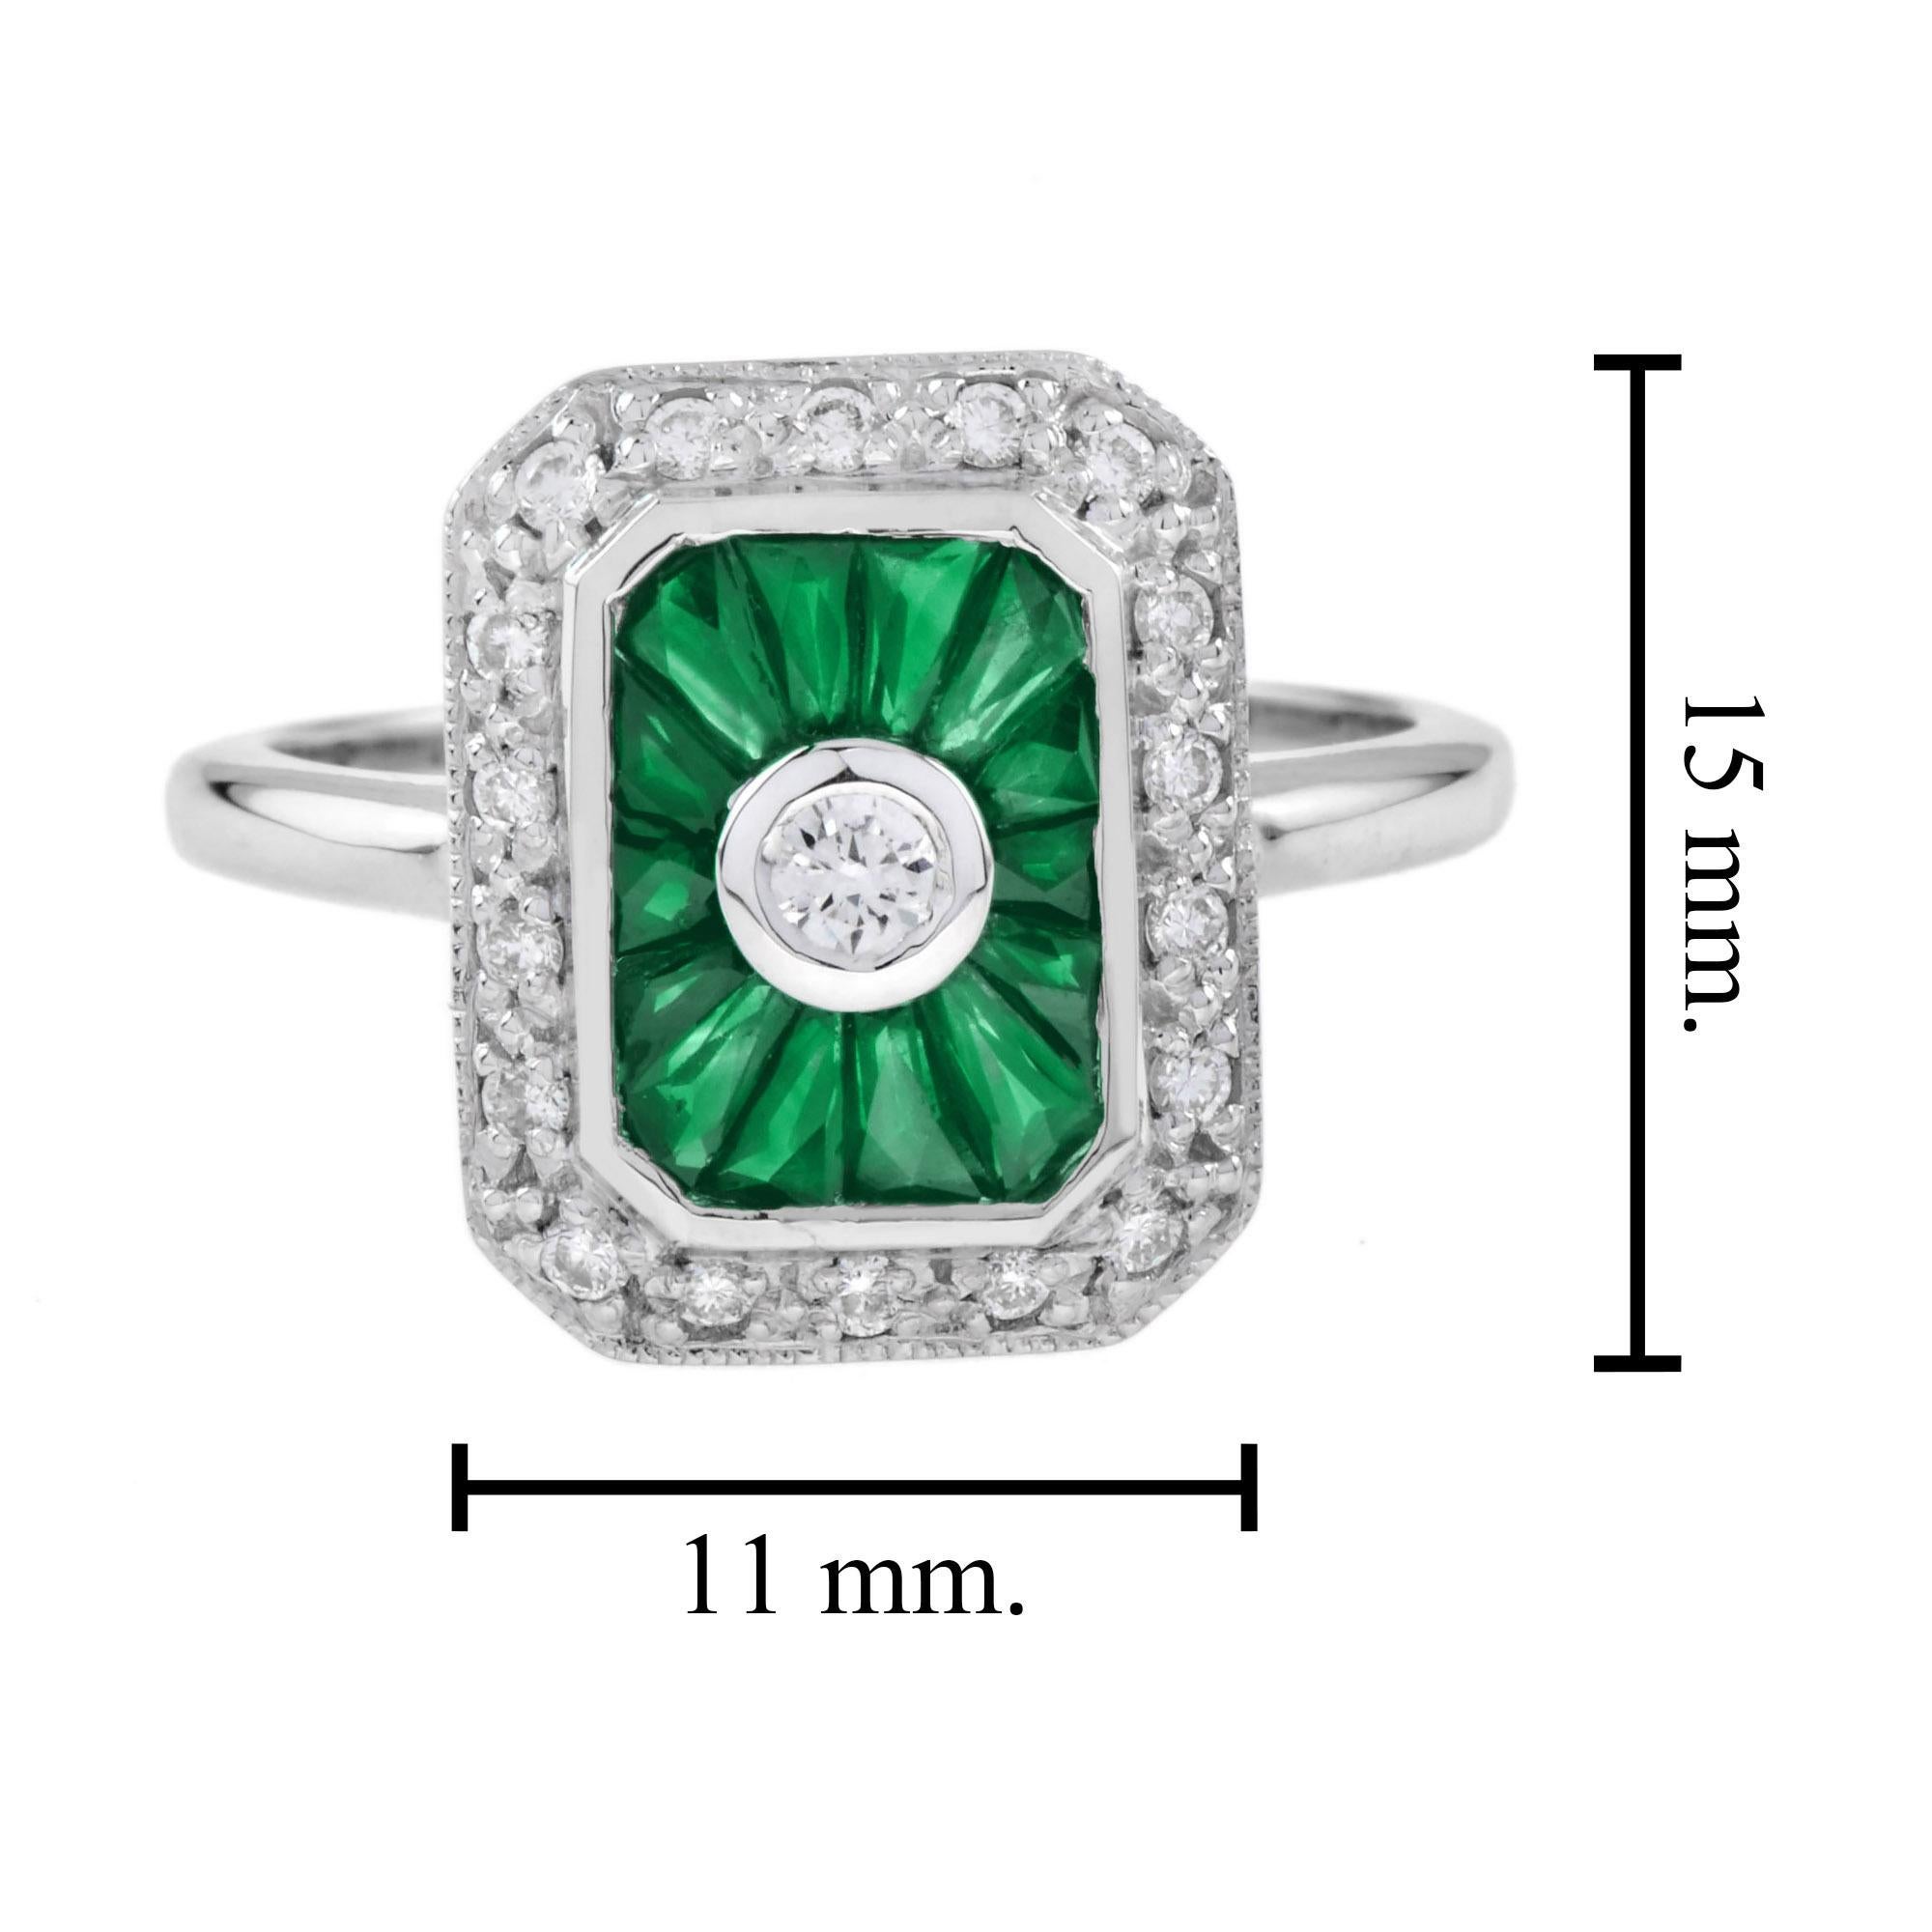 For Sale:  Diamond and Emerald Halo Art Deco Style Engagement Ring in 14K White Gold 7